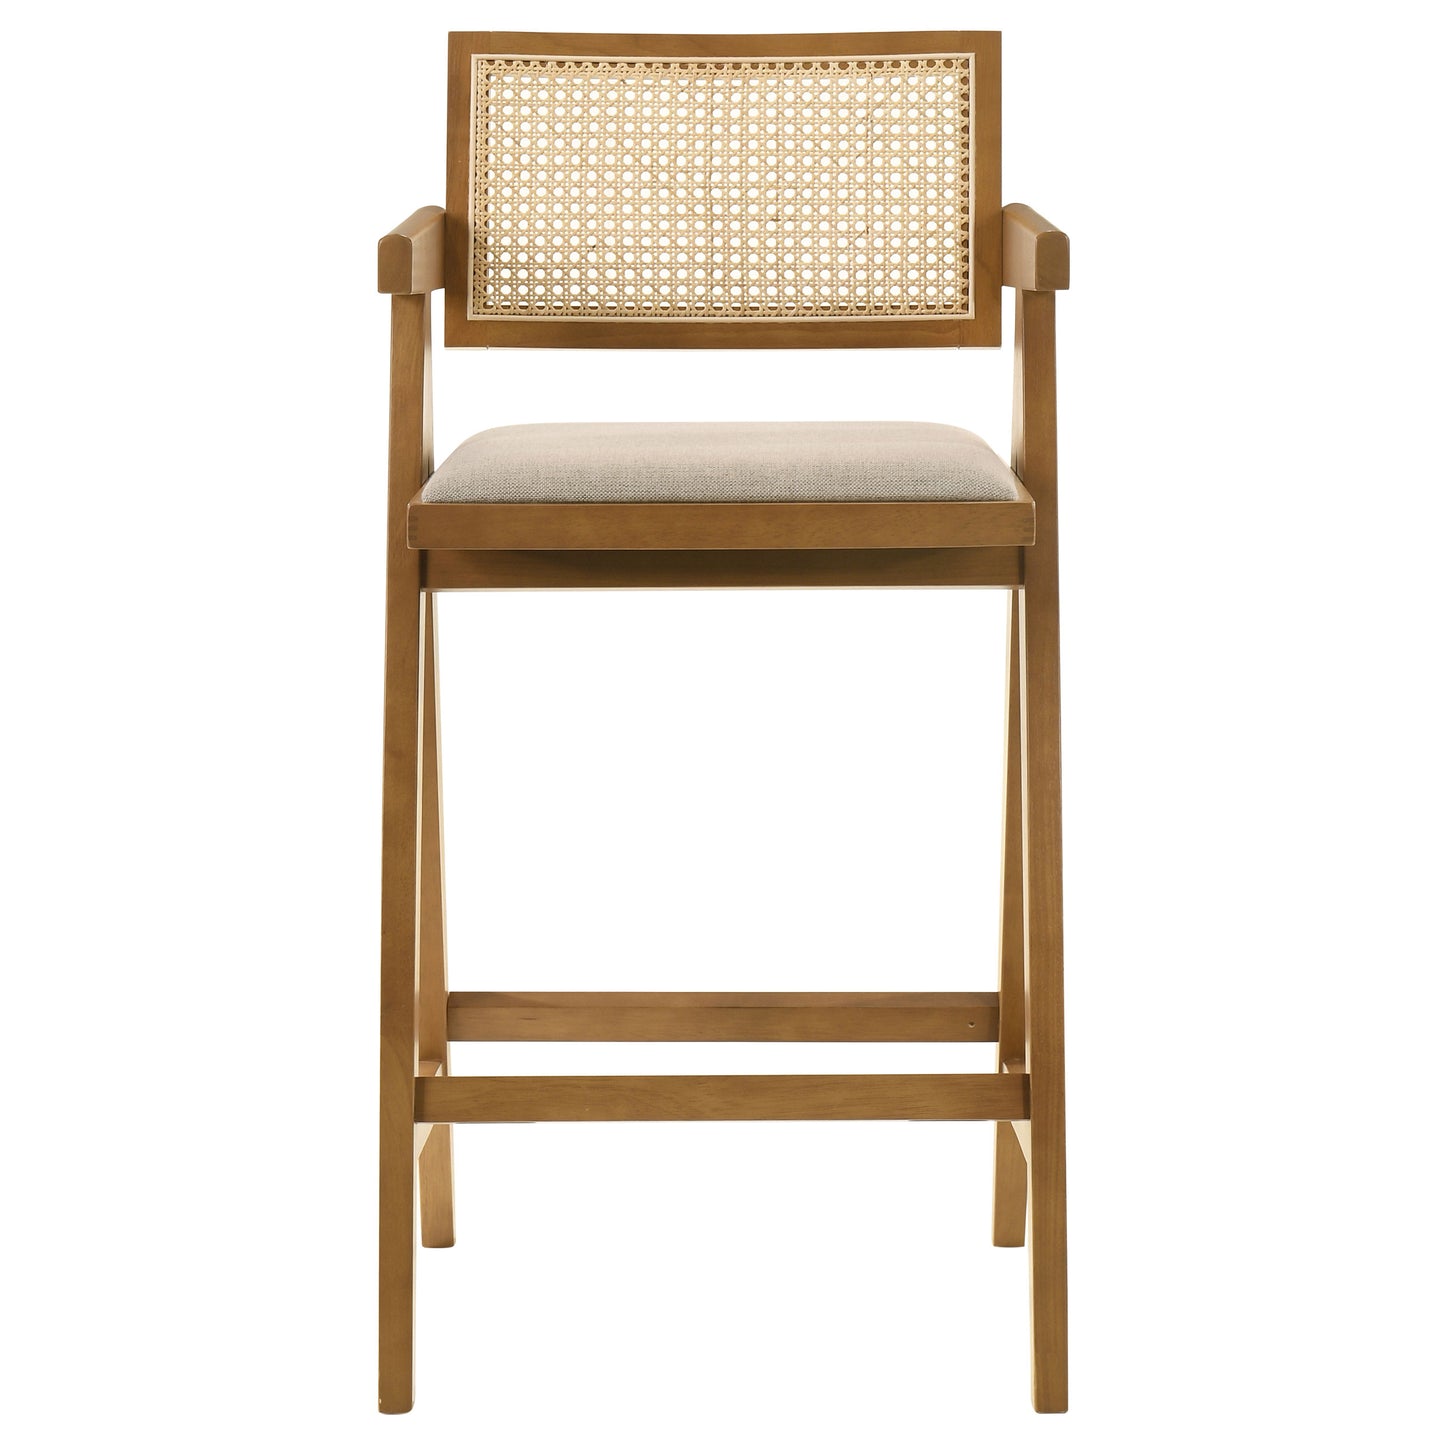 Kane Solid Wood Bar Stool with Woven Rattan Back and Upholstered Seat Light Walnut (Set of 2)